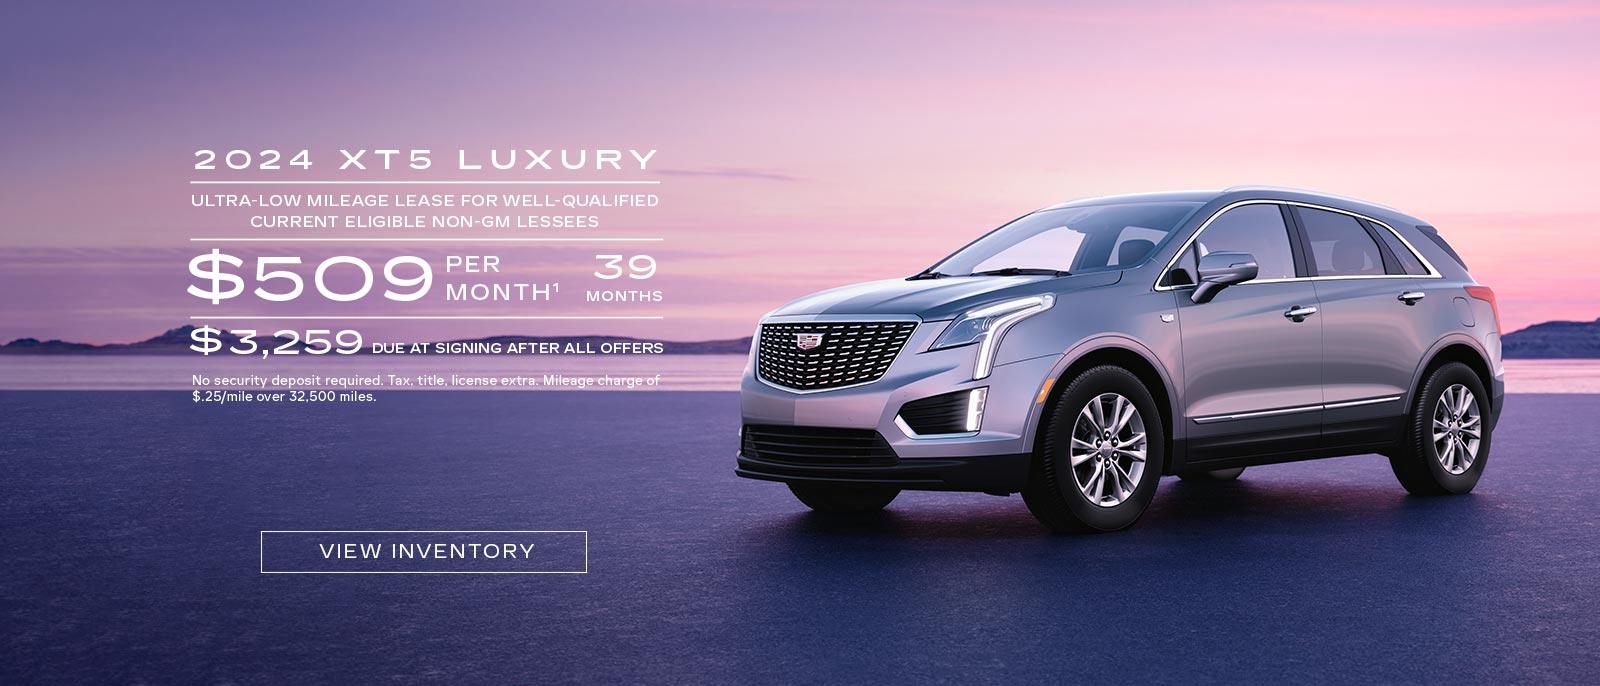 2024 XT5 Luxury. Ultra-low mileage lease for well-qualified current eligible Non-GM Lessees. $509 per month. 39 months. $3,259 due at signing after all offers.